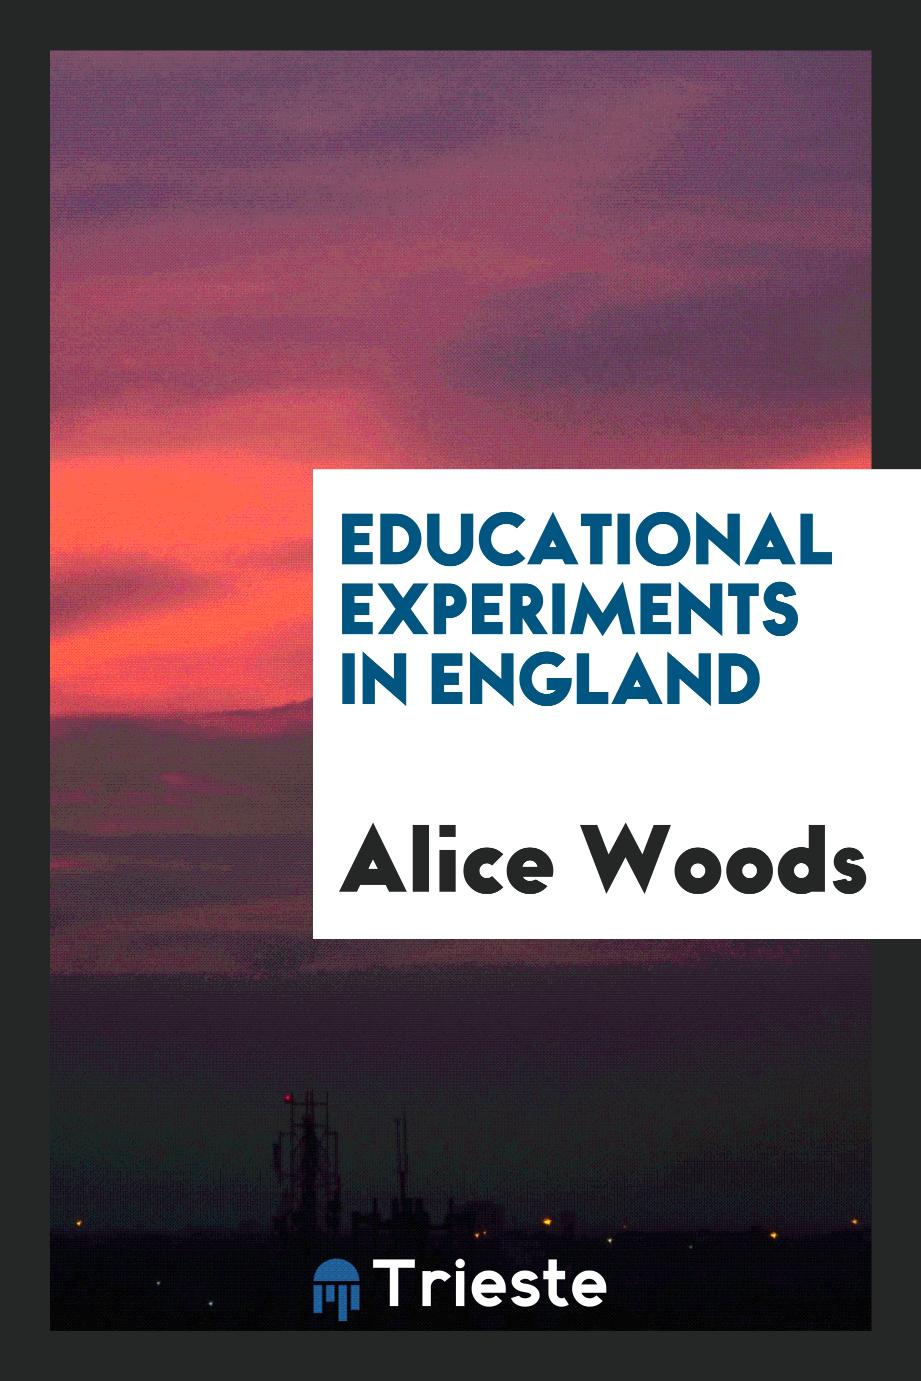 Educational experiments in England